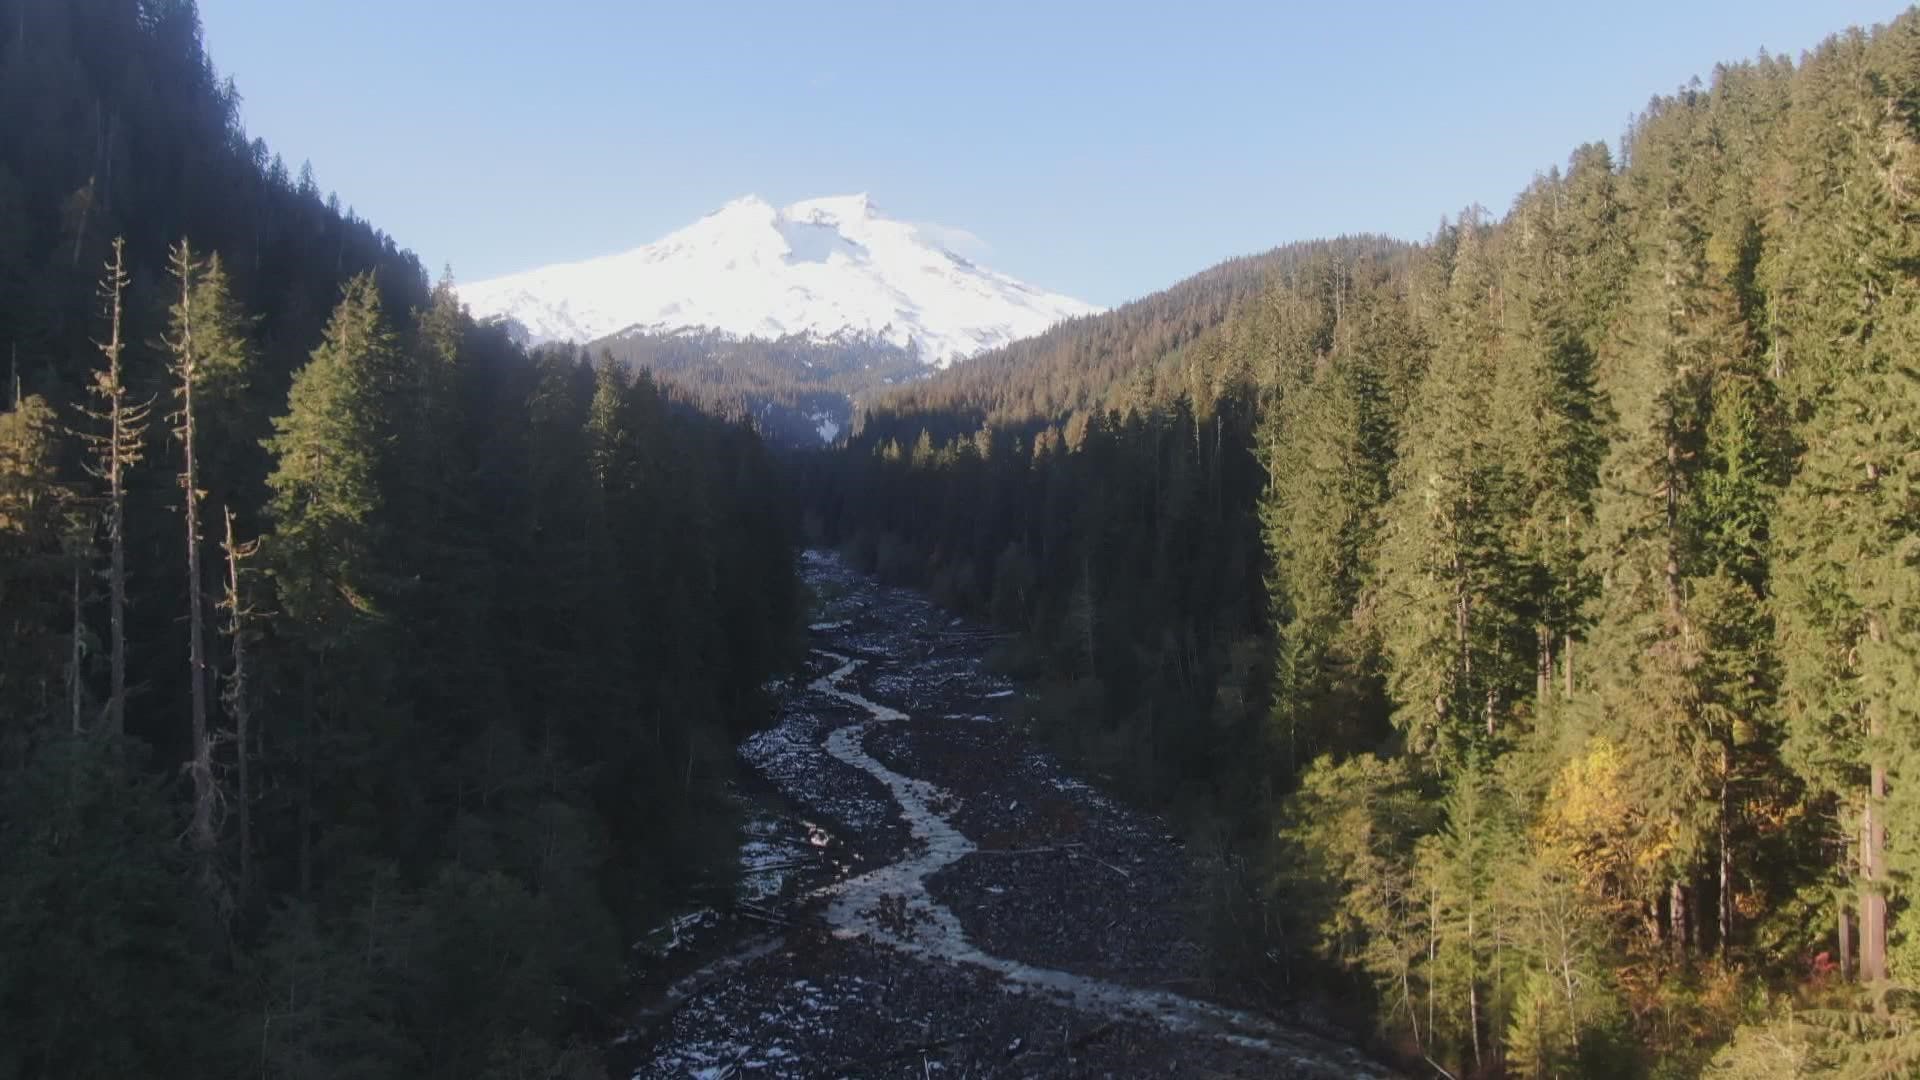 Western Washington University hosts a program dedicated to discovering what makes up some of the most dangerous volcanoes in the United States.